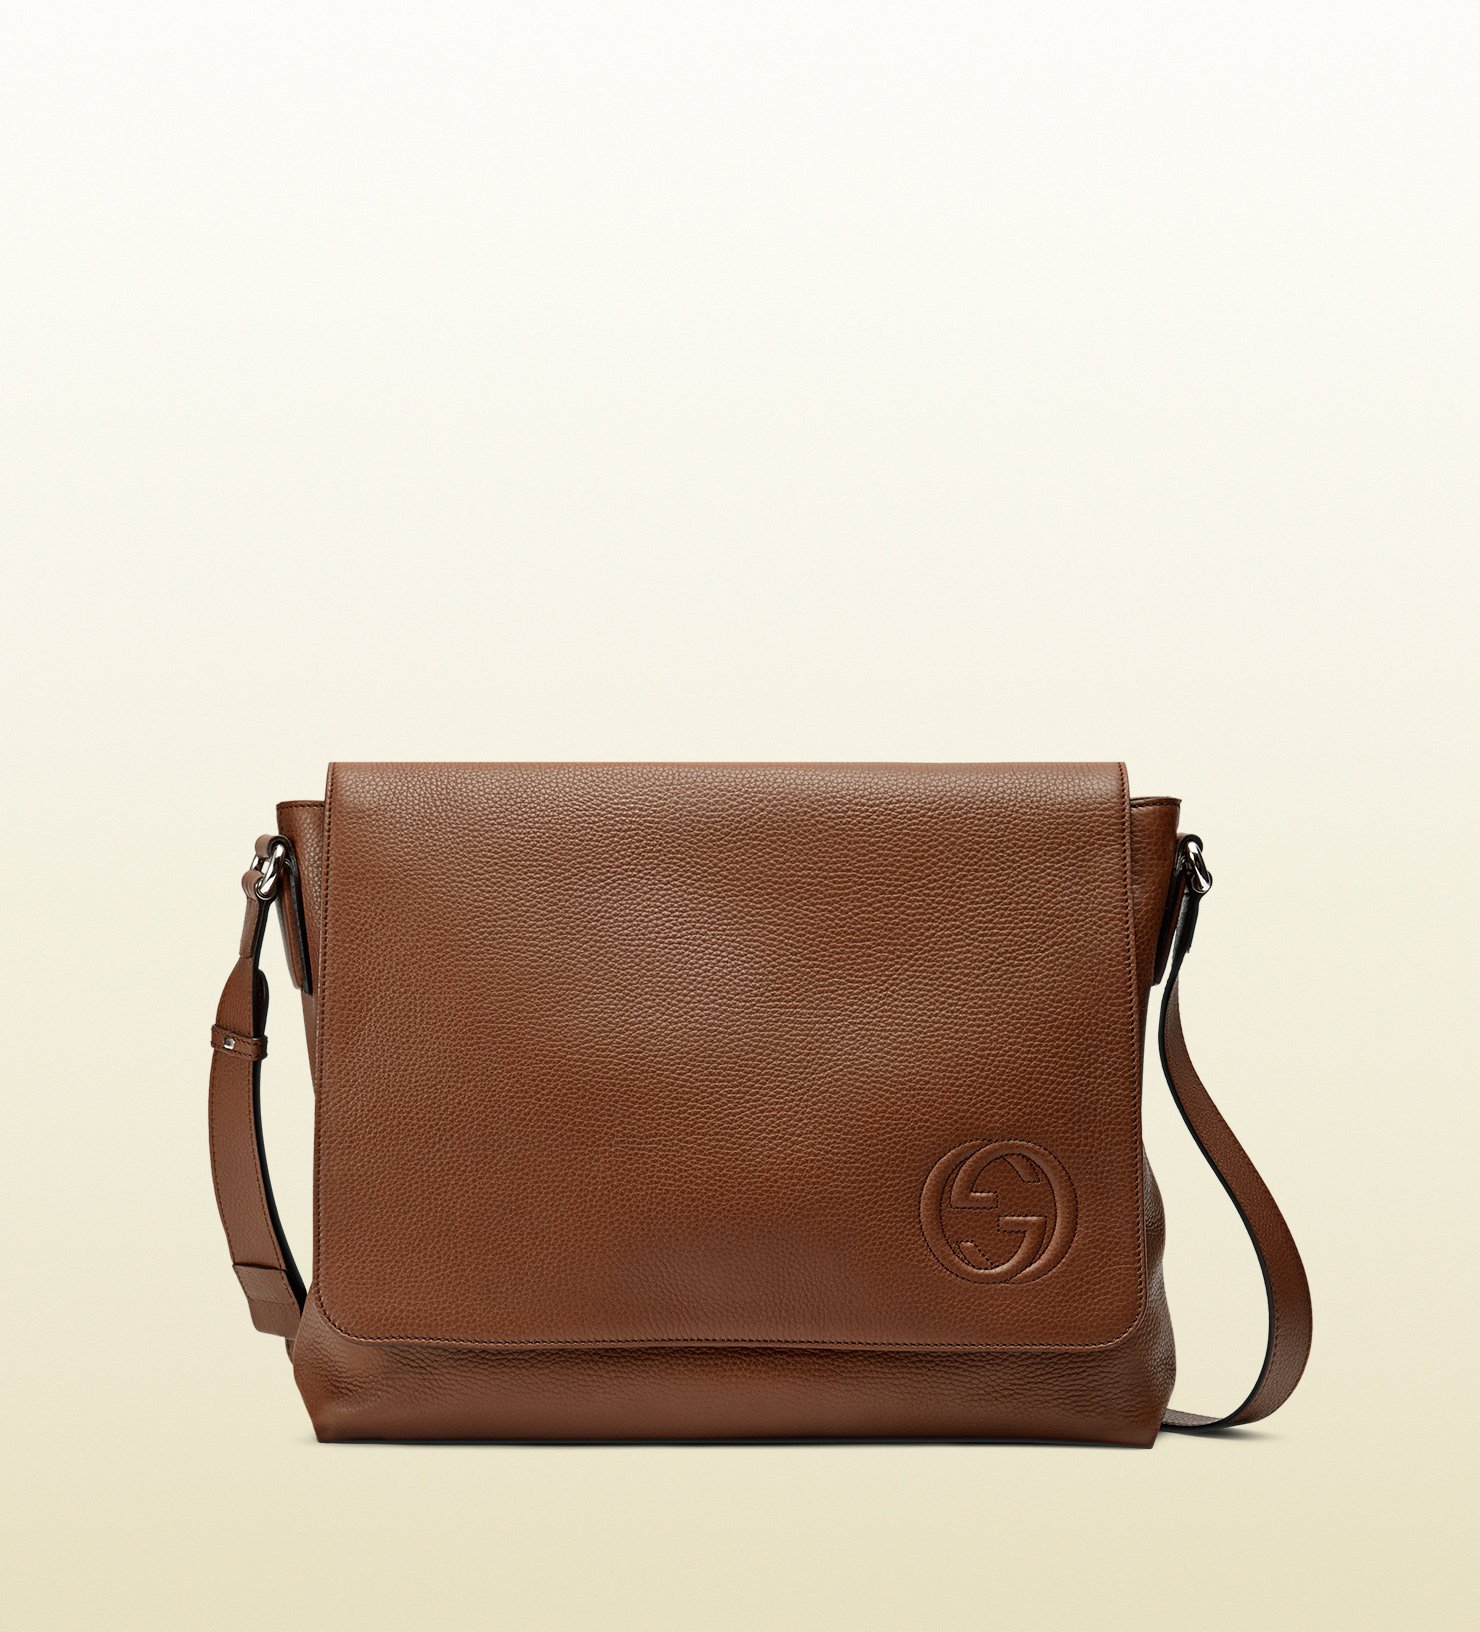 Gucci Soho Leather Messenger Bag in Brown for Men | Lyst